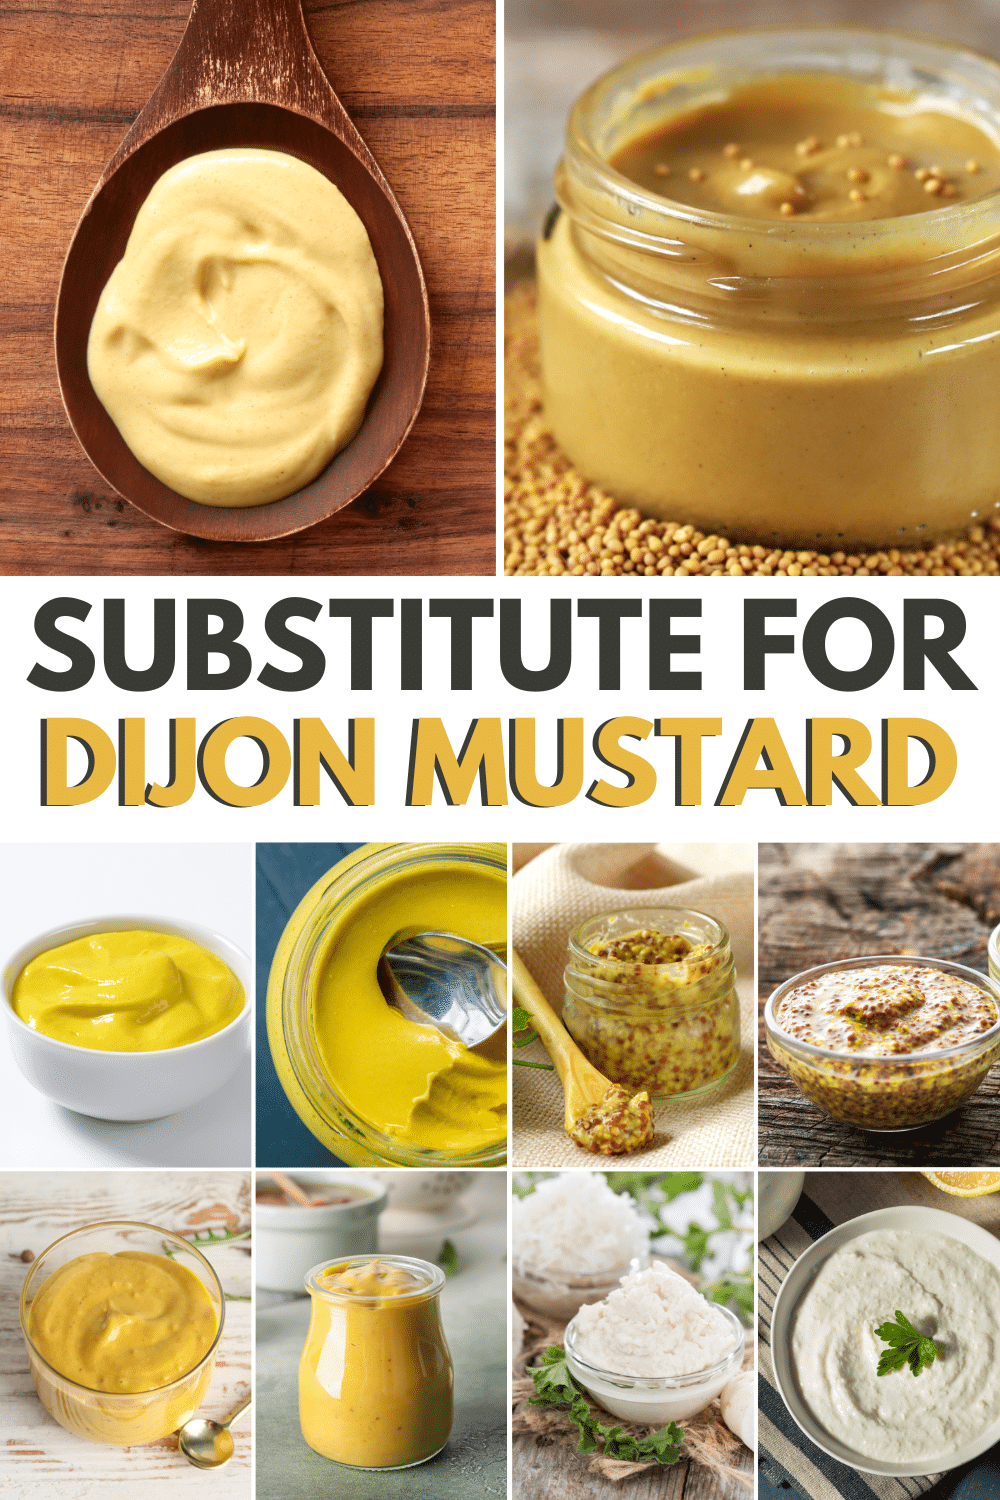 A collection of images showcasing a Dijon mustard substitute.